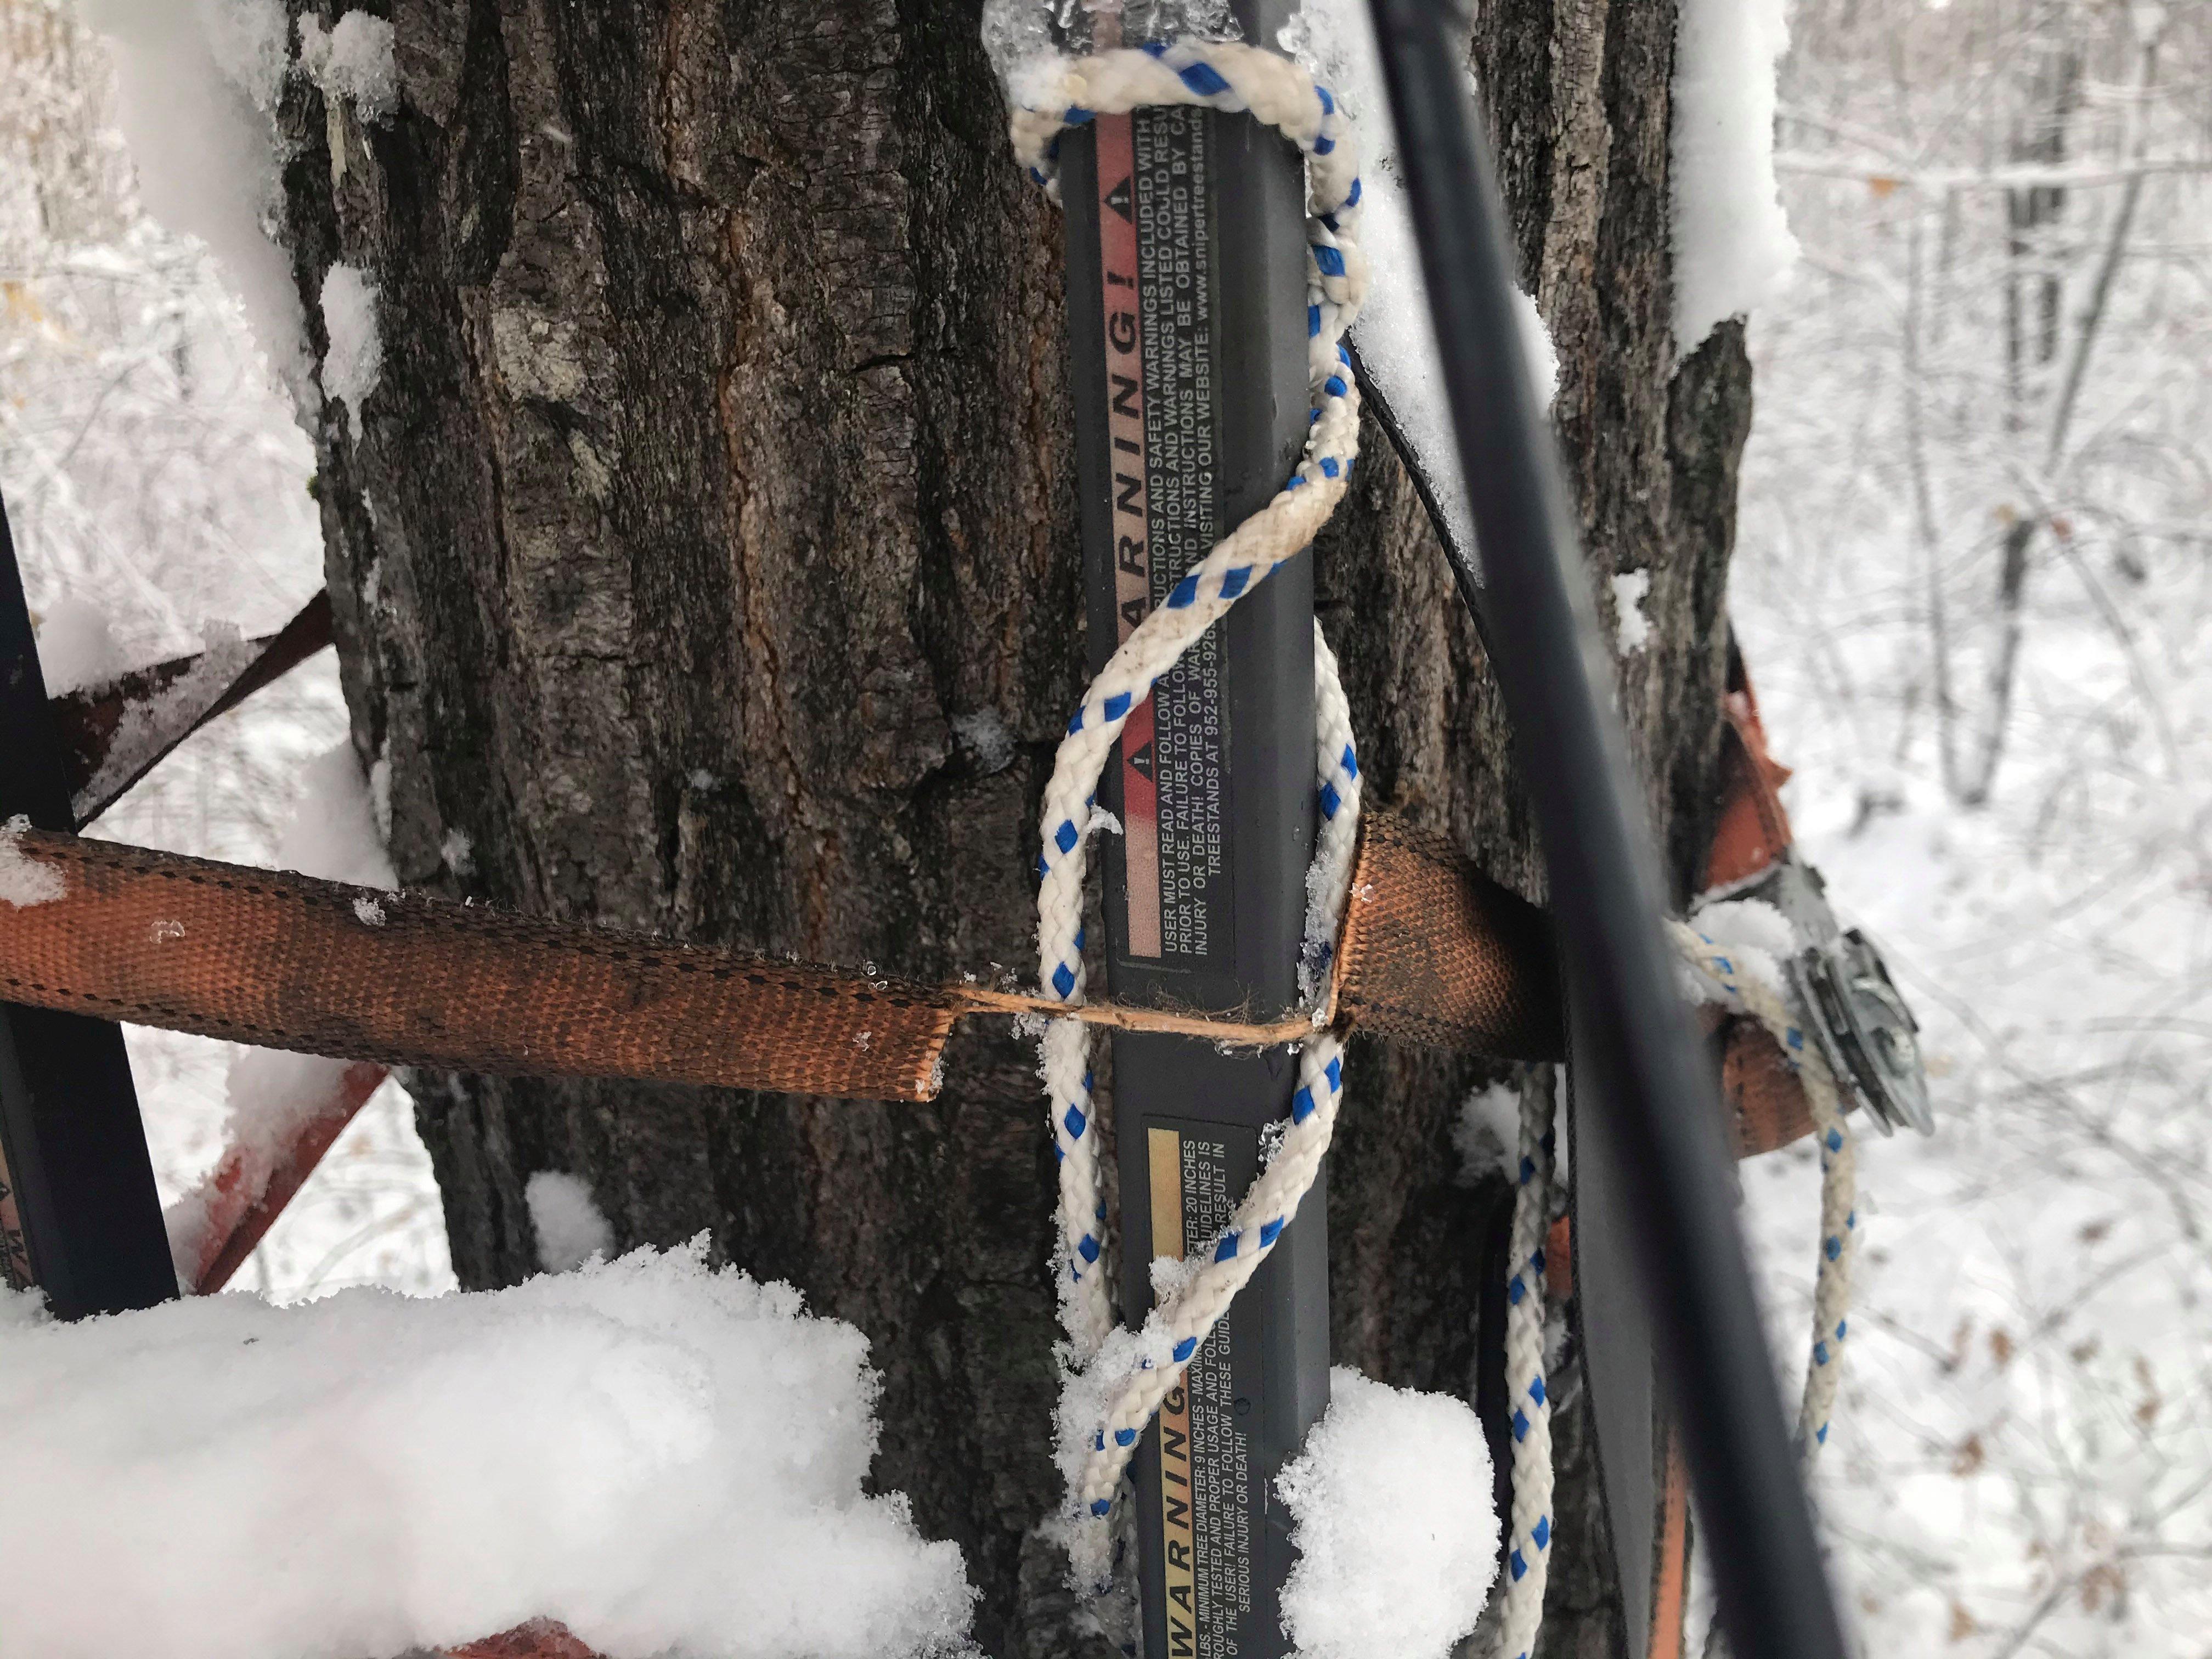 A close-up view shows a cut strap from the sabotaged treestand. Image by Michigan Department of Natural Resources